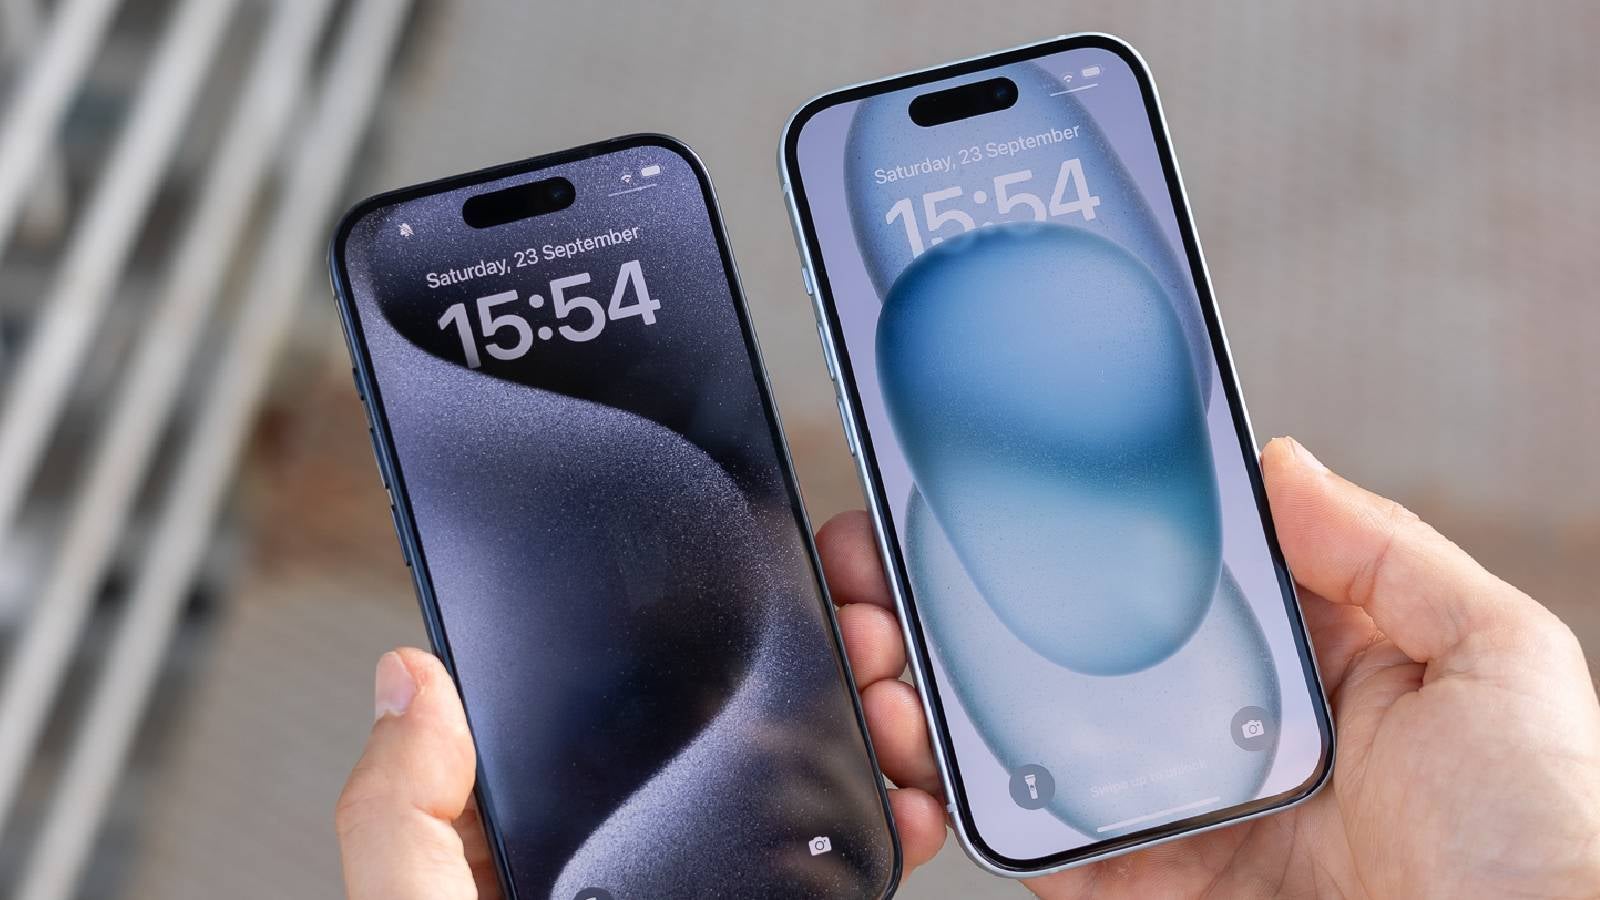 Apple equipped Pro and standard iPhone models with different chips in 2023 and 2022 - iPhone 16 and 16 Pro will be equally powerful, says new report